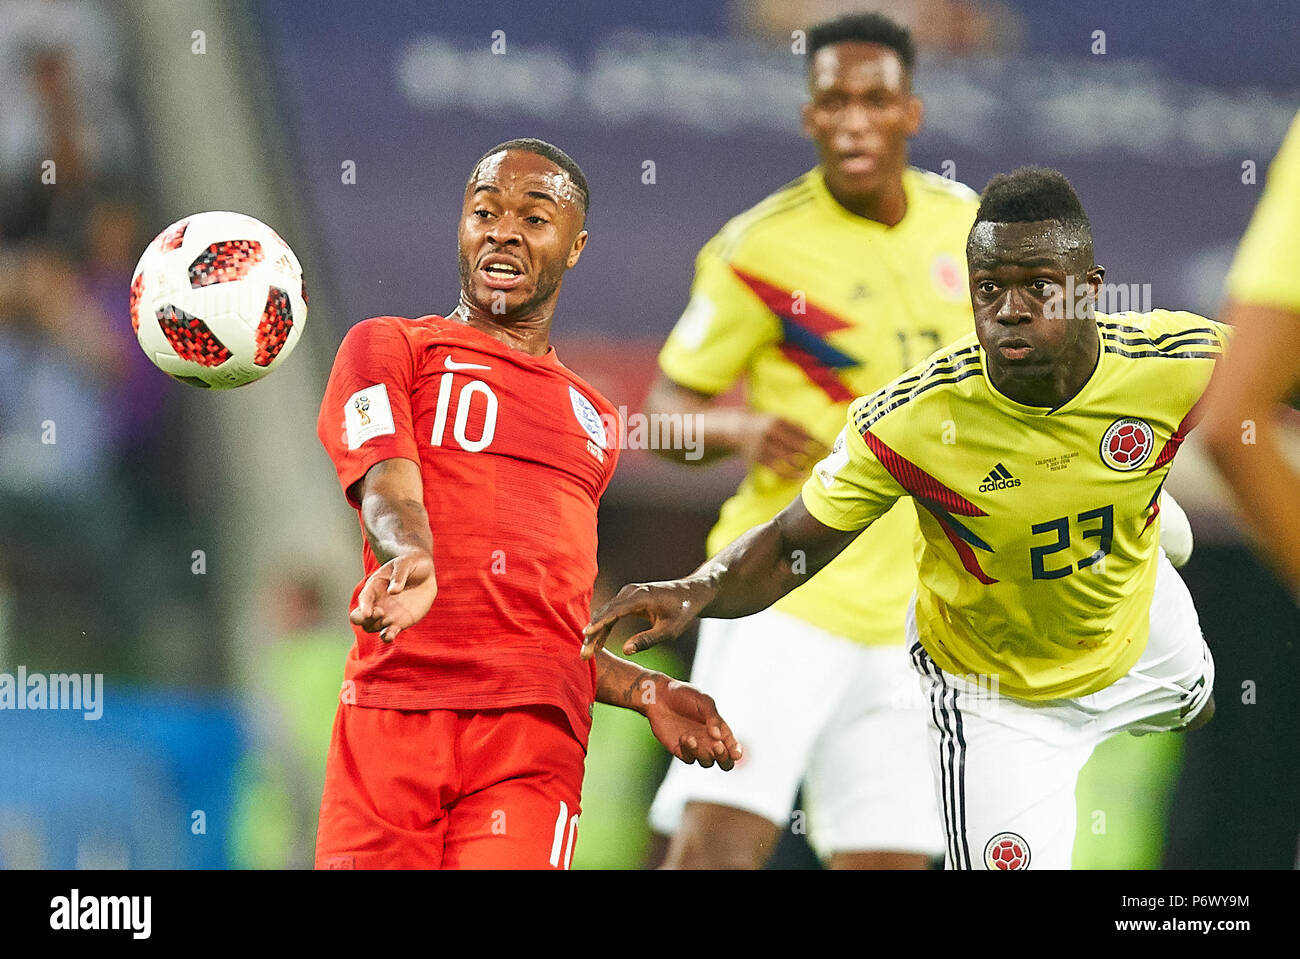 Moscow, Russia. 3rd July. England- Columbia, Soccer, Moscow, July 03, 2018 Raheem STERLING, England 10  compete for the ball, tackling, duel, header against Davinson SANCHEZ, Columbia Nr.23  ENGLAND - COLUMBIA FIFA WORLD CUP 2018 RUSSIA, Season 2018/2019,  July 03, 2018 S p a r t a k Stadium in Moscow, Russia. © Peter Schatz / Alamy Live News Stock Photo